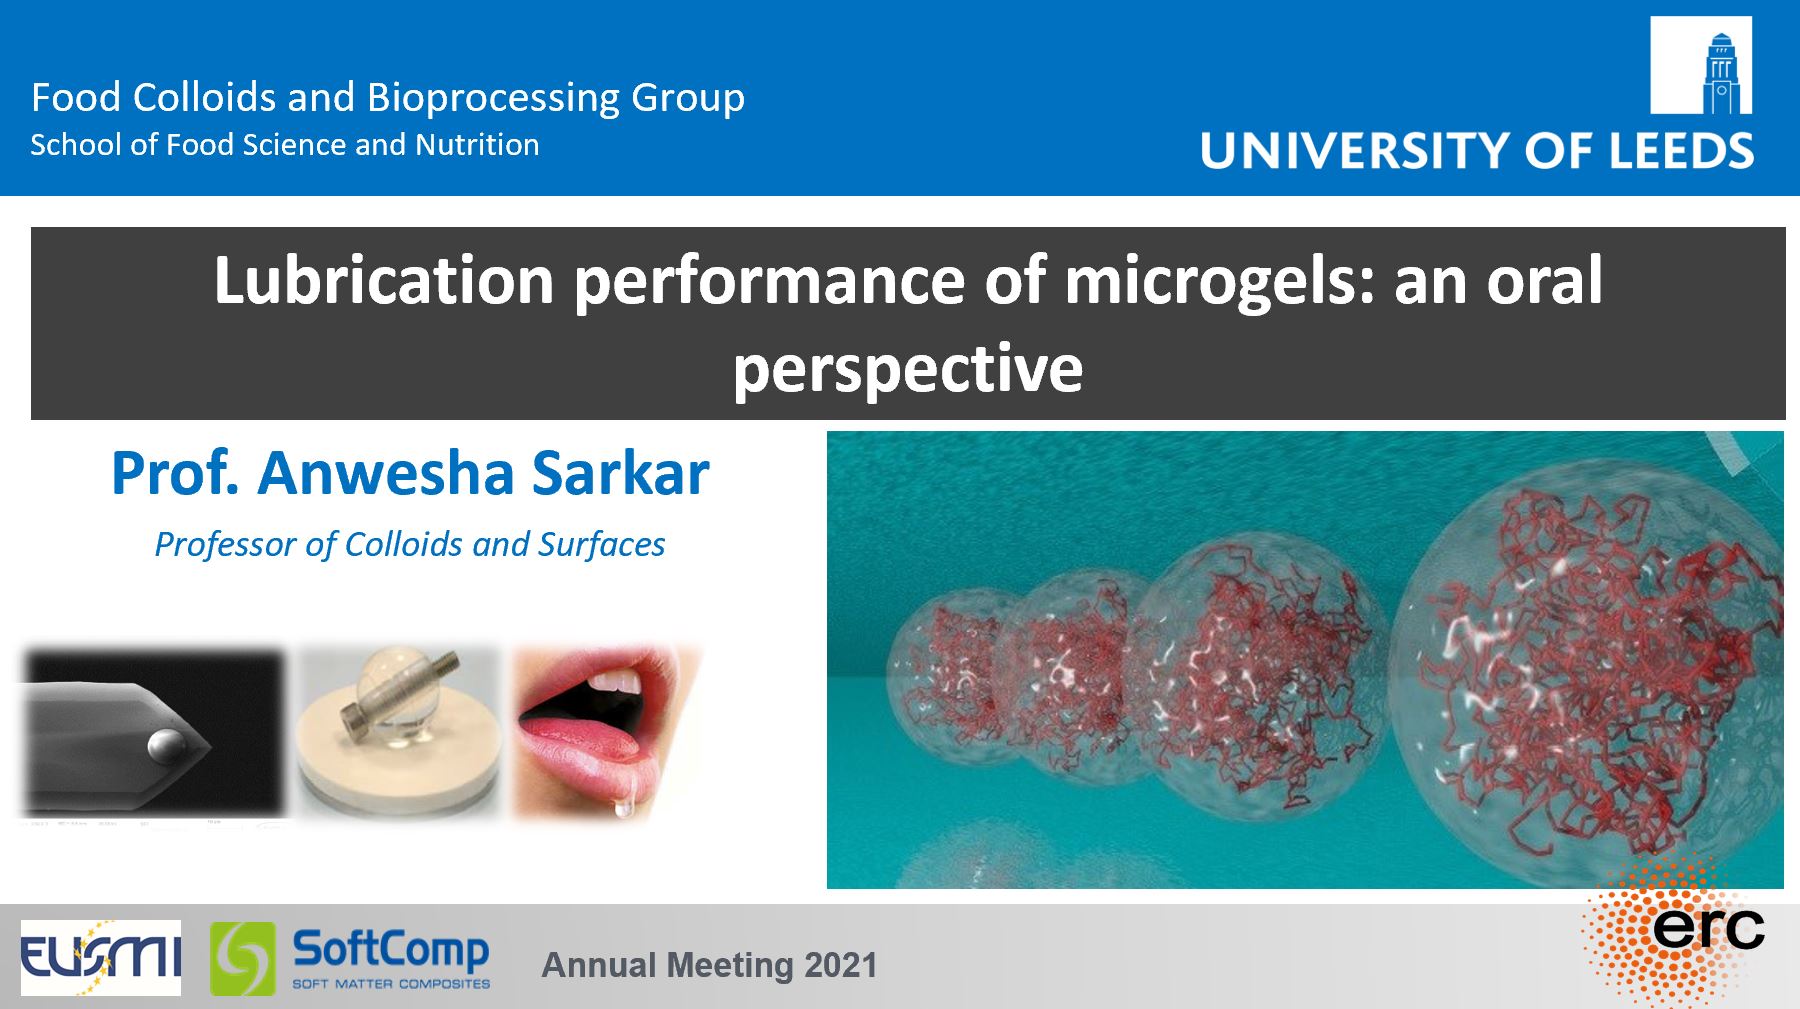 Prof. Sarkar gave a plenary lecture at the Joint EUSMI/SoftComp Annual Meeting 2021